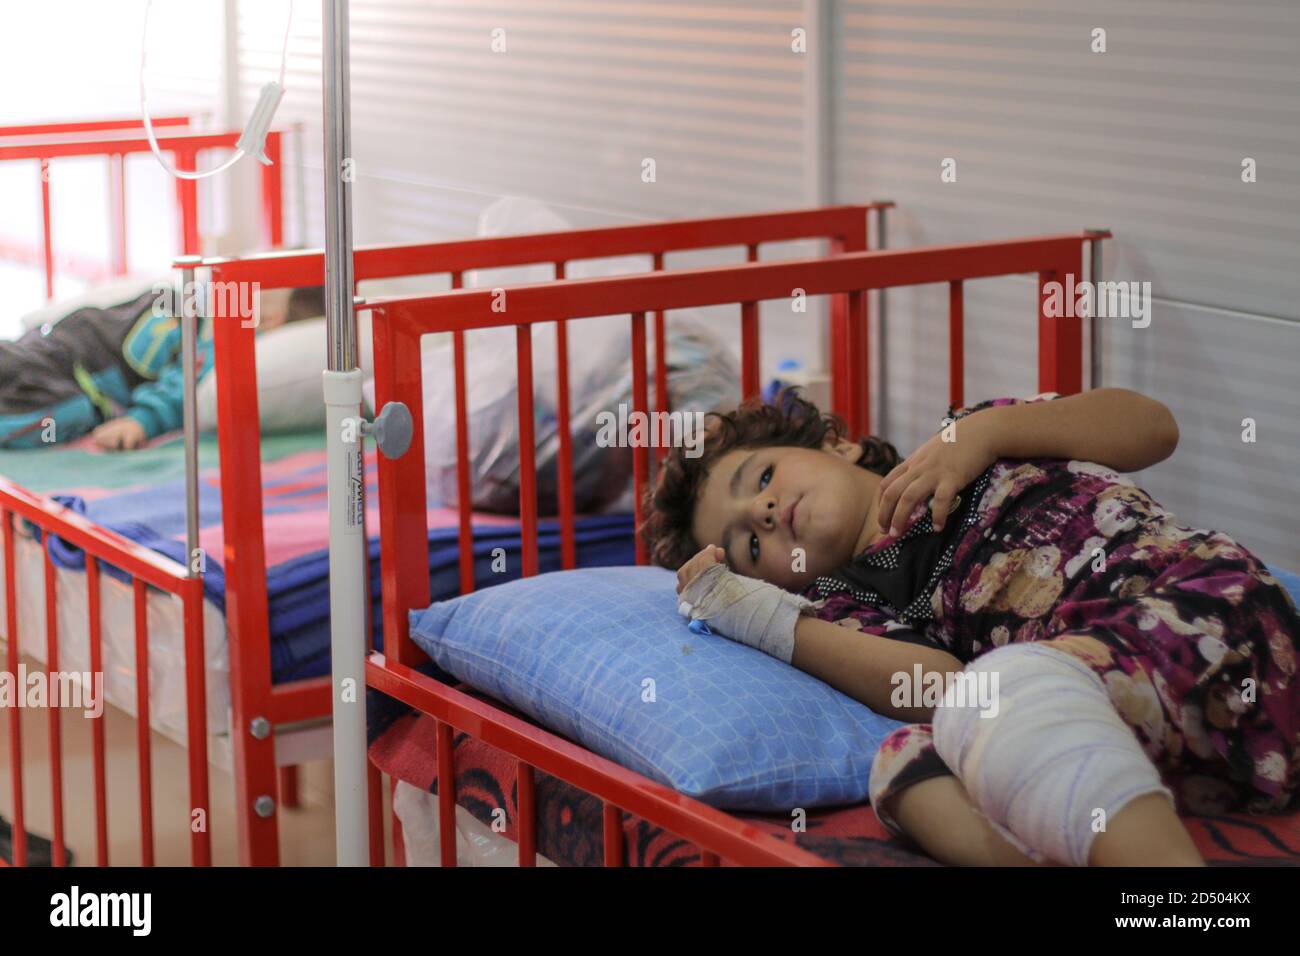 A sick child lies on a hospital bed. Stock Photo